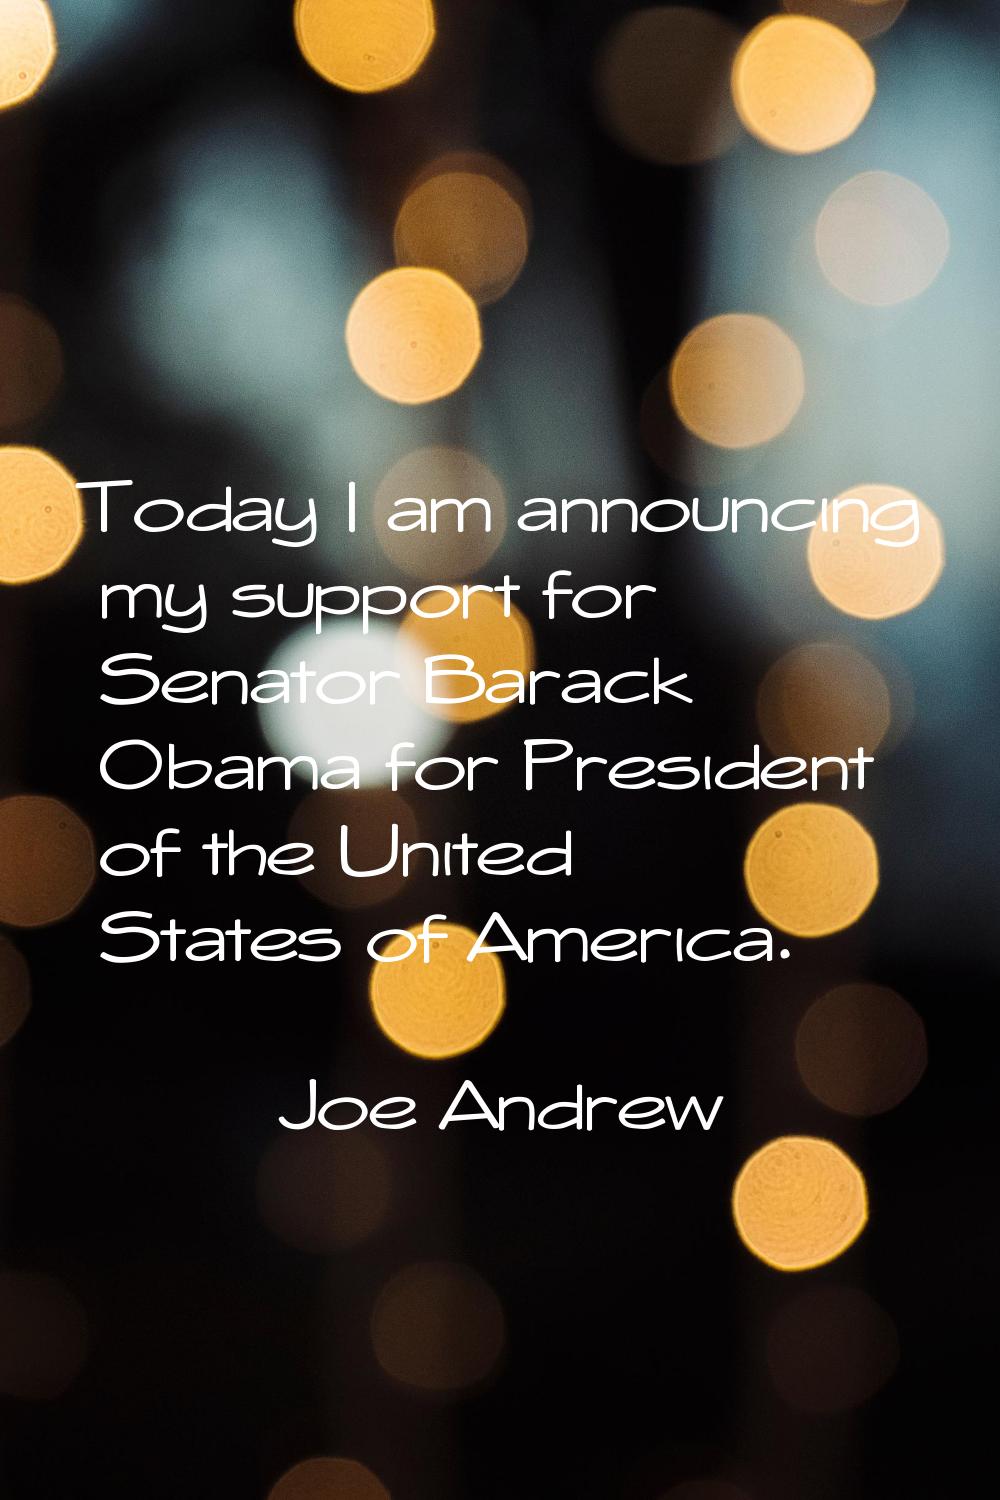 Today I am announcing my support for Senator Barack Obama for President of the United States of Ame